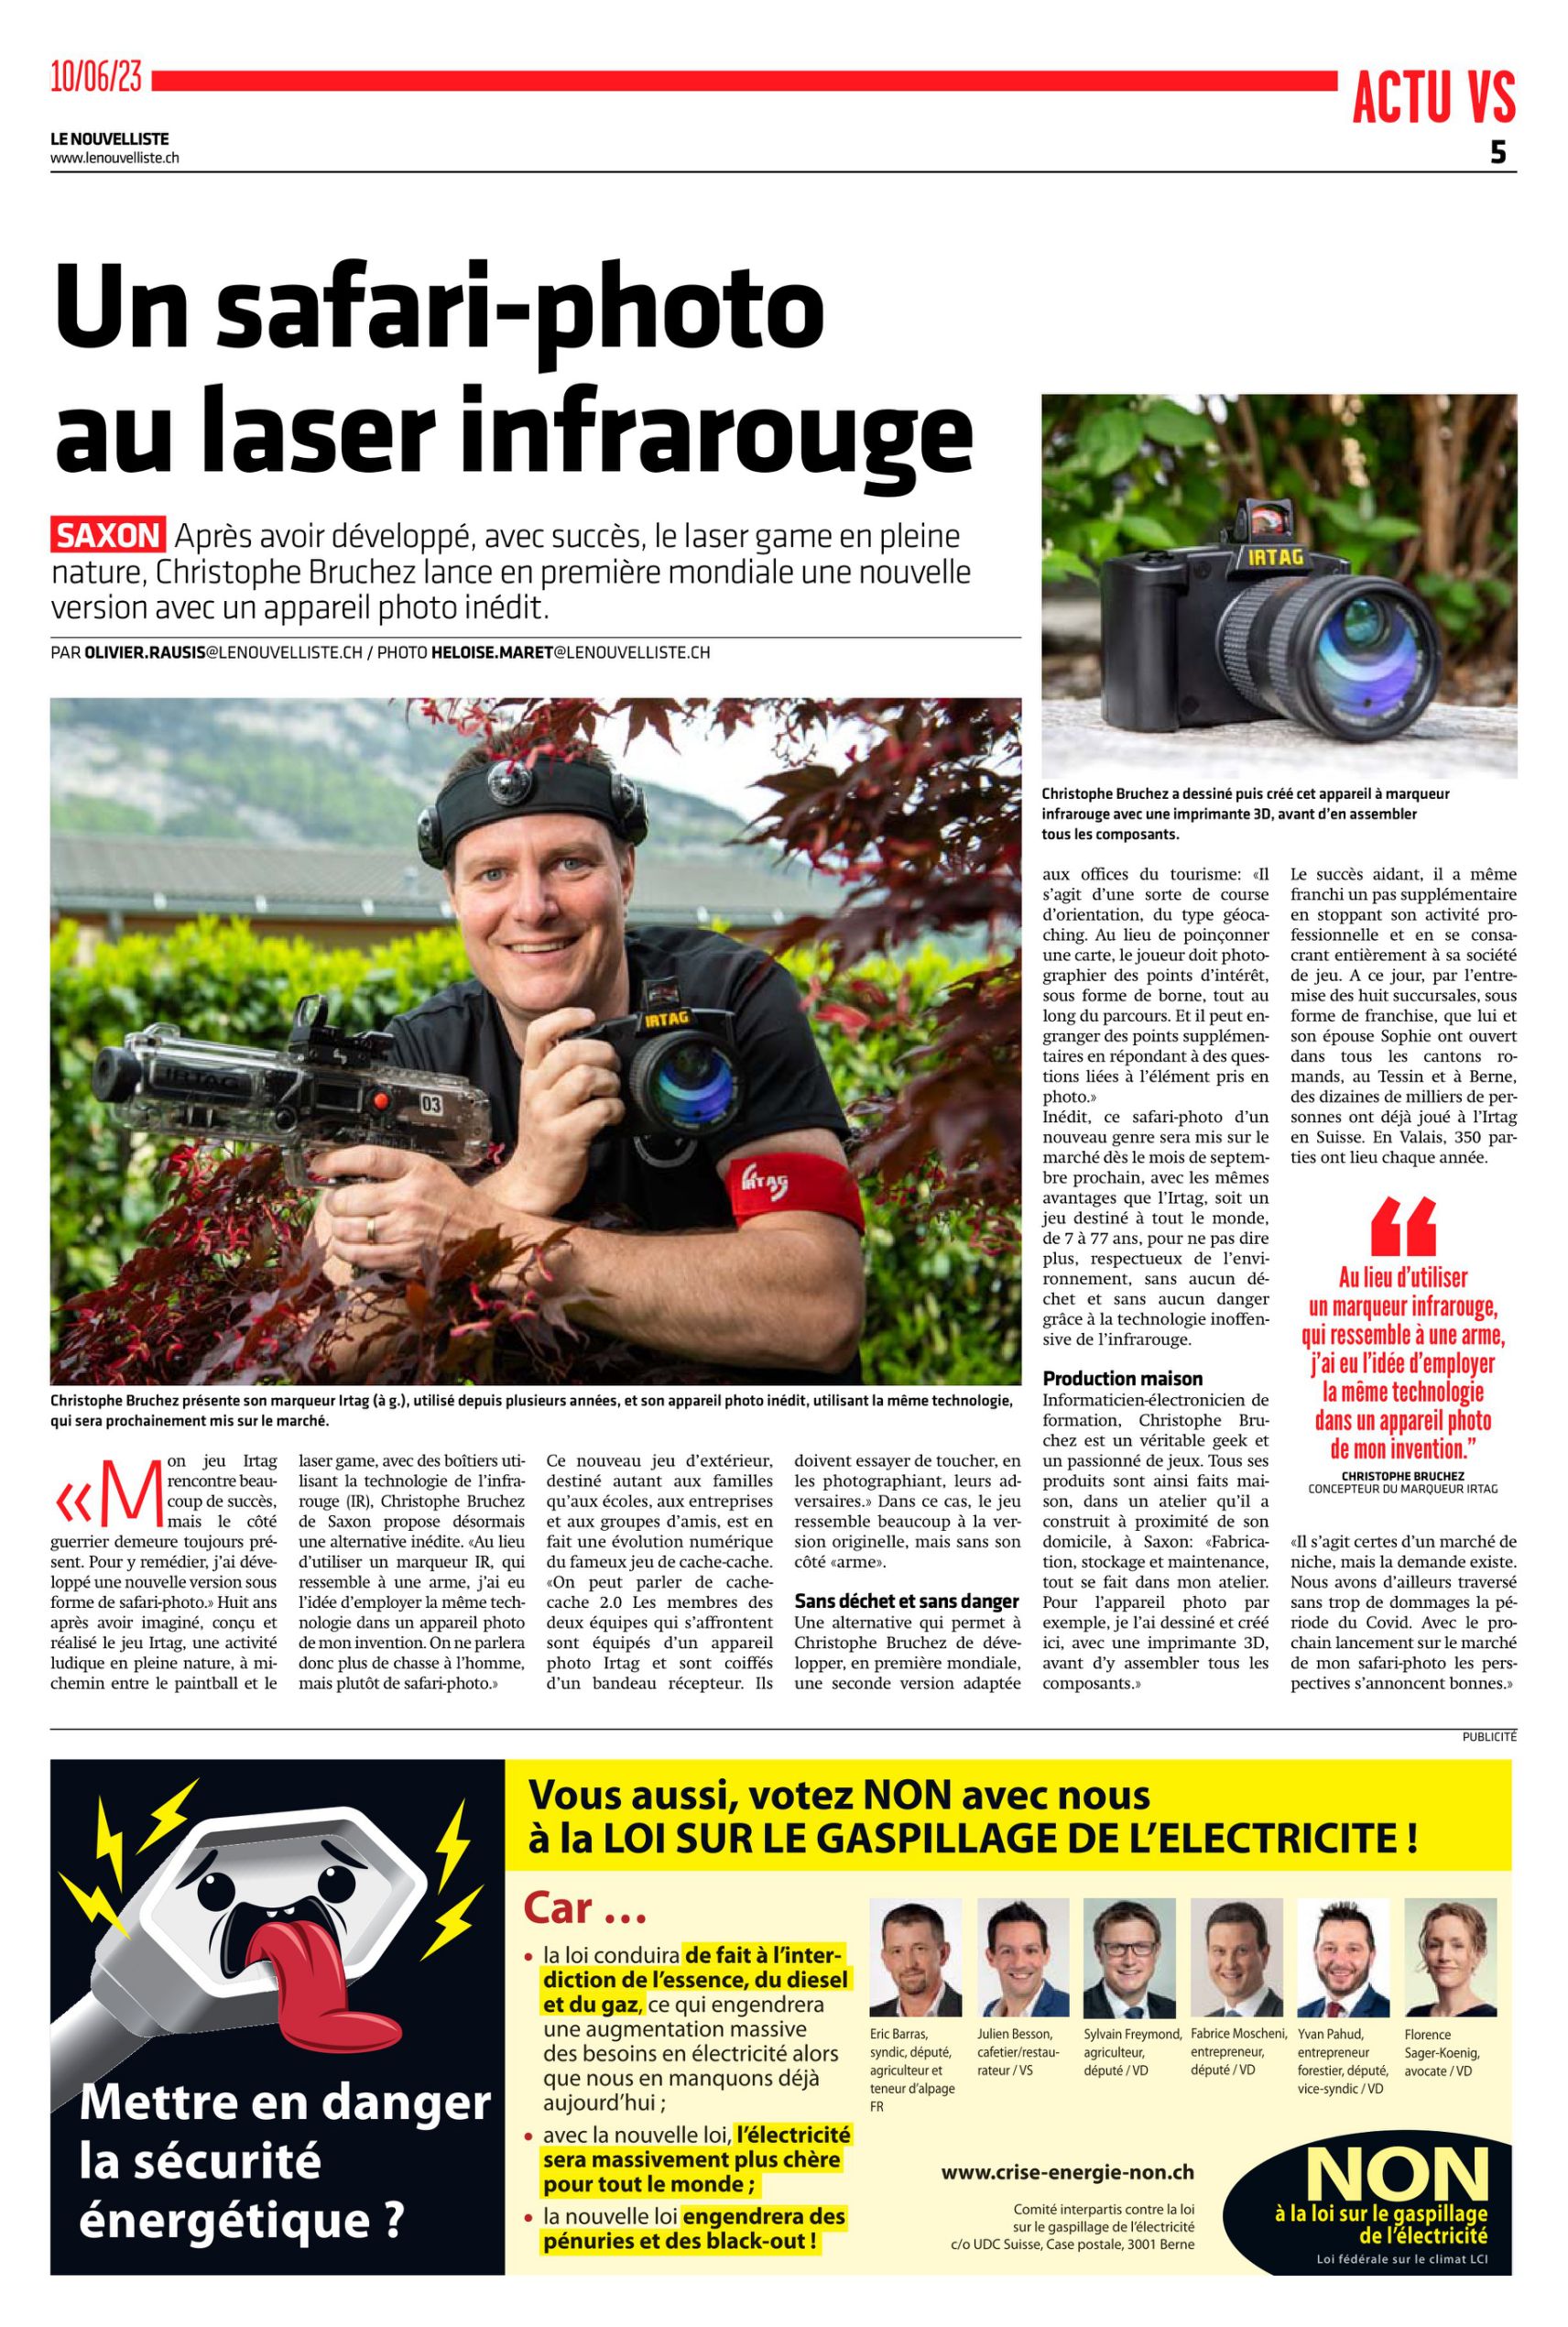 Article in the nouvelliste 2023